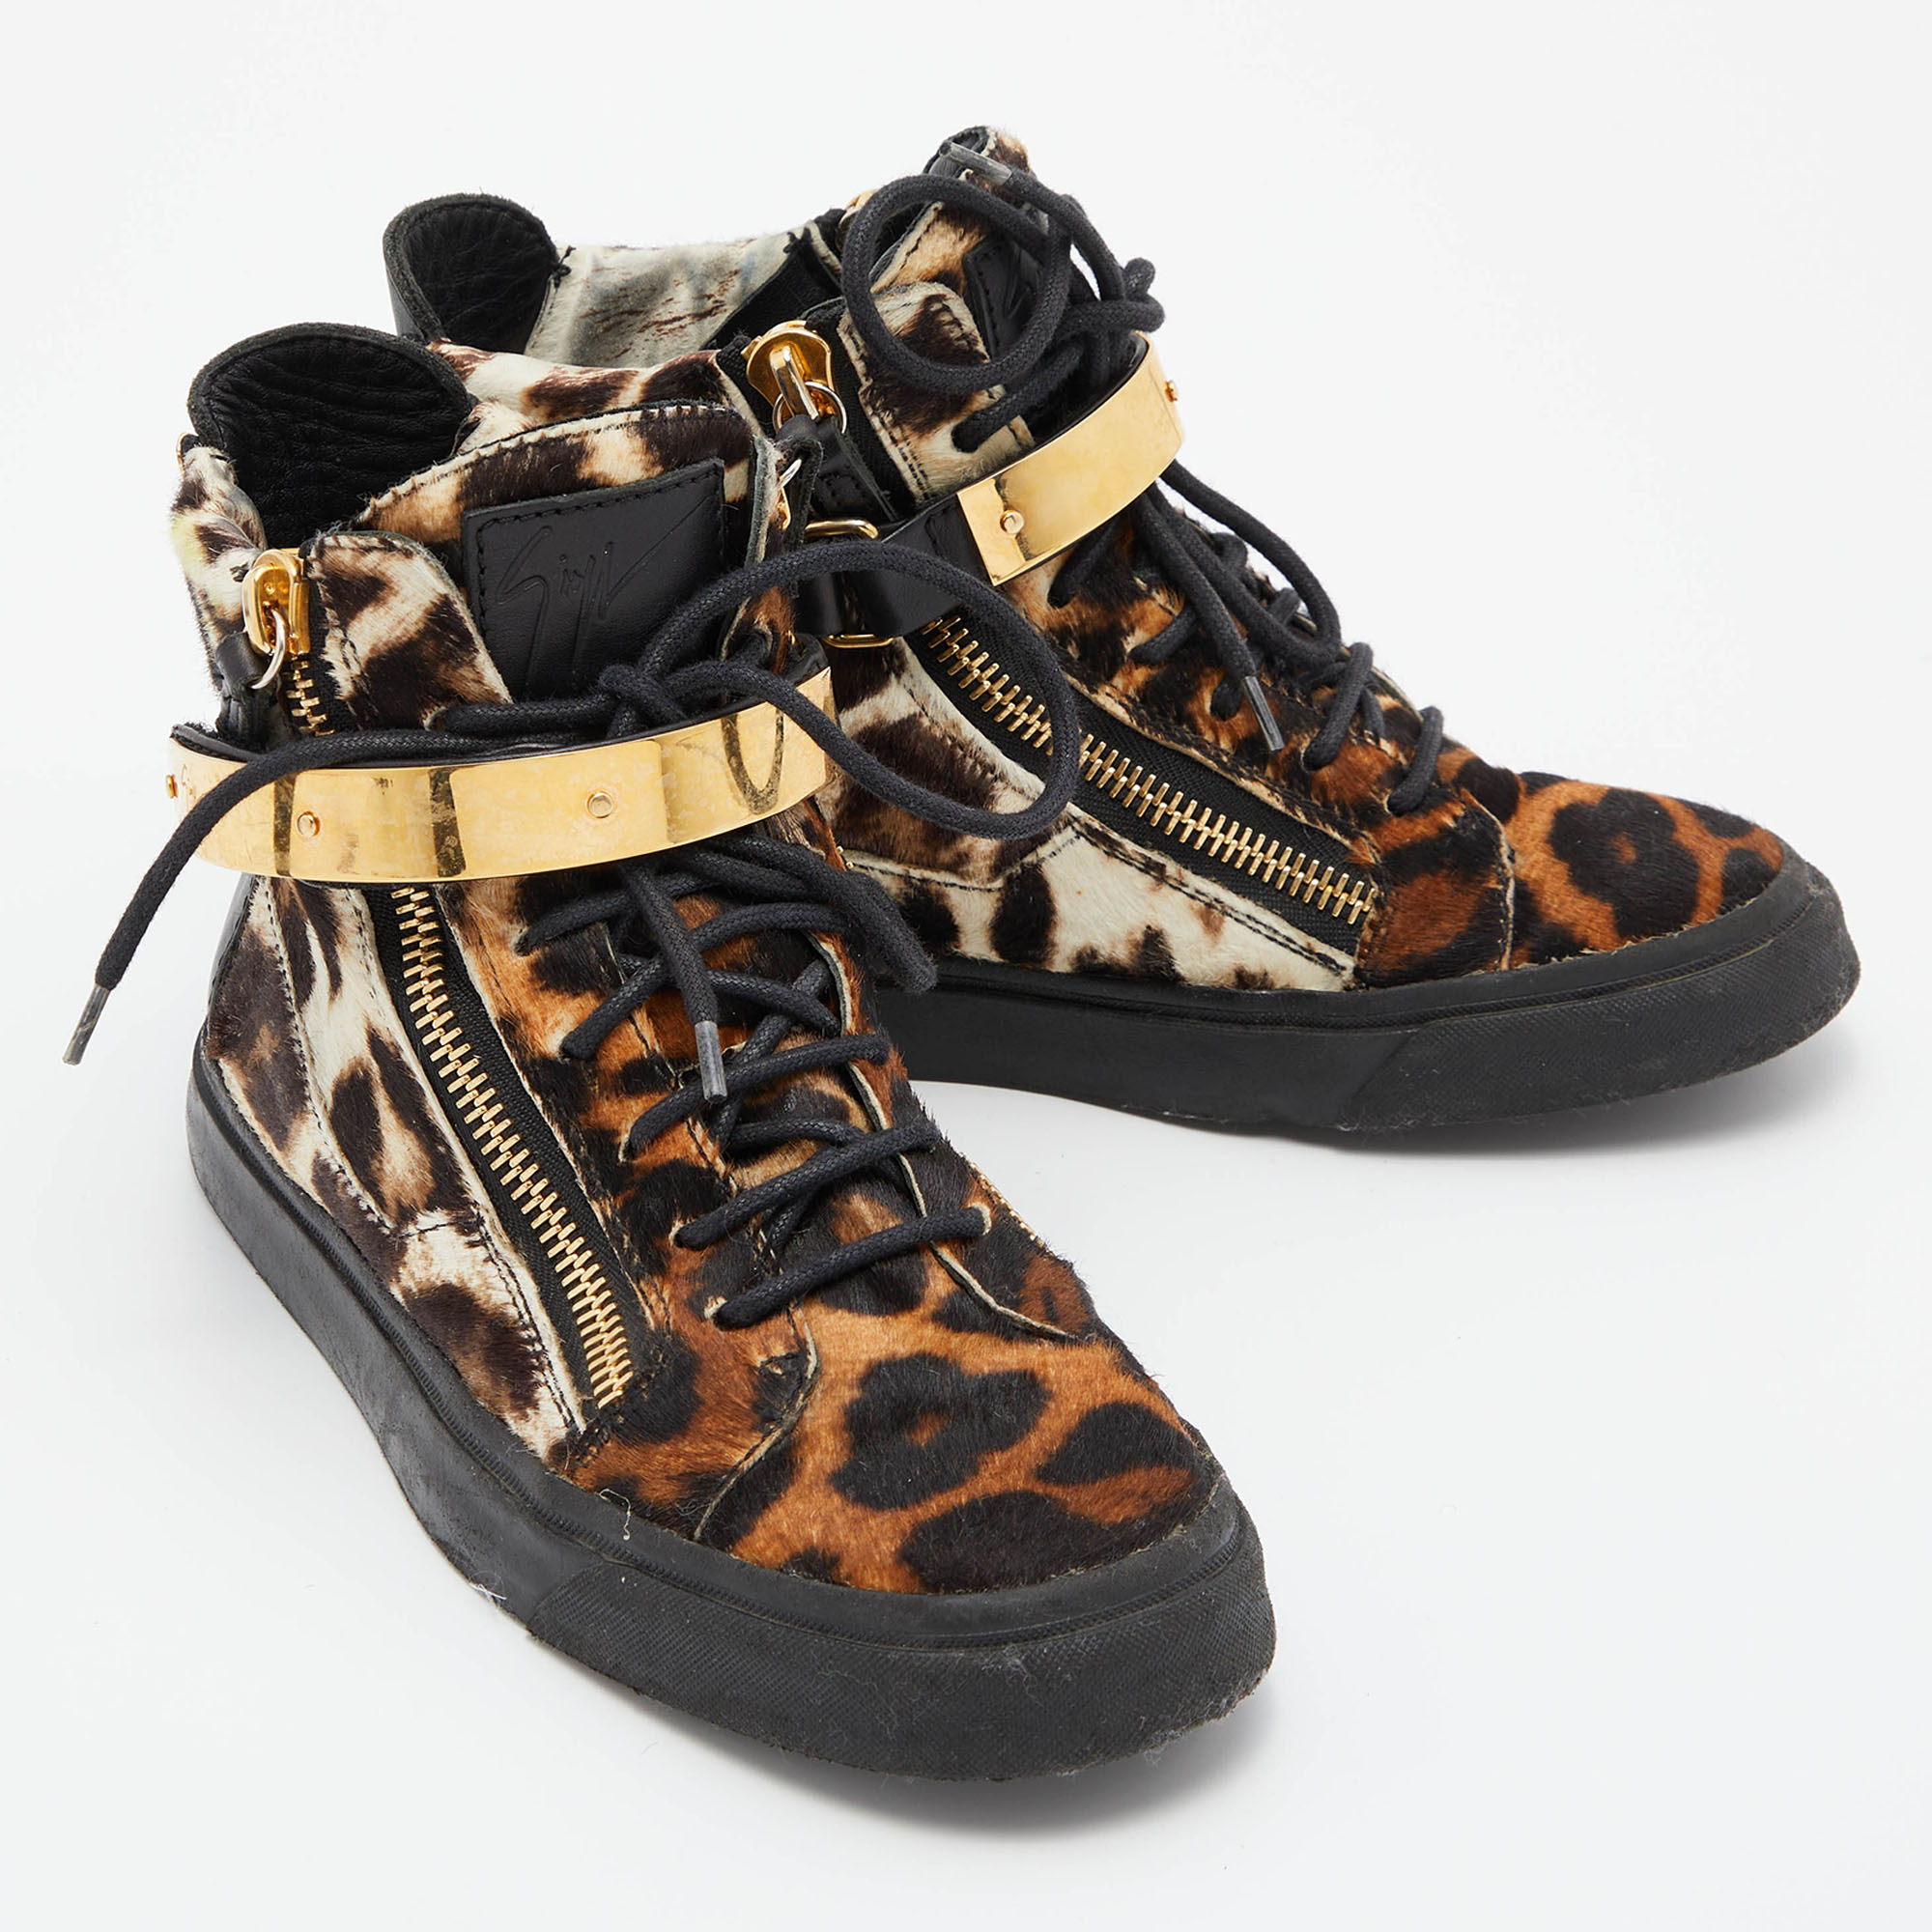 Giuseppe Zanotti Brown/Black Leopard Print Calfhair Lace Up High Top Sneakers 37